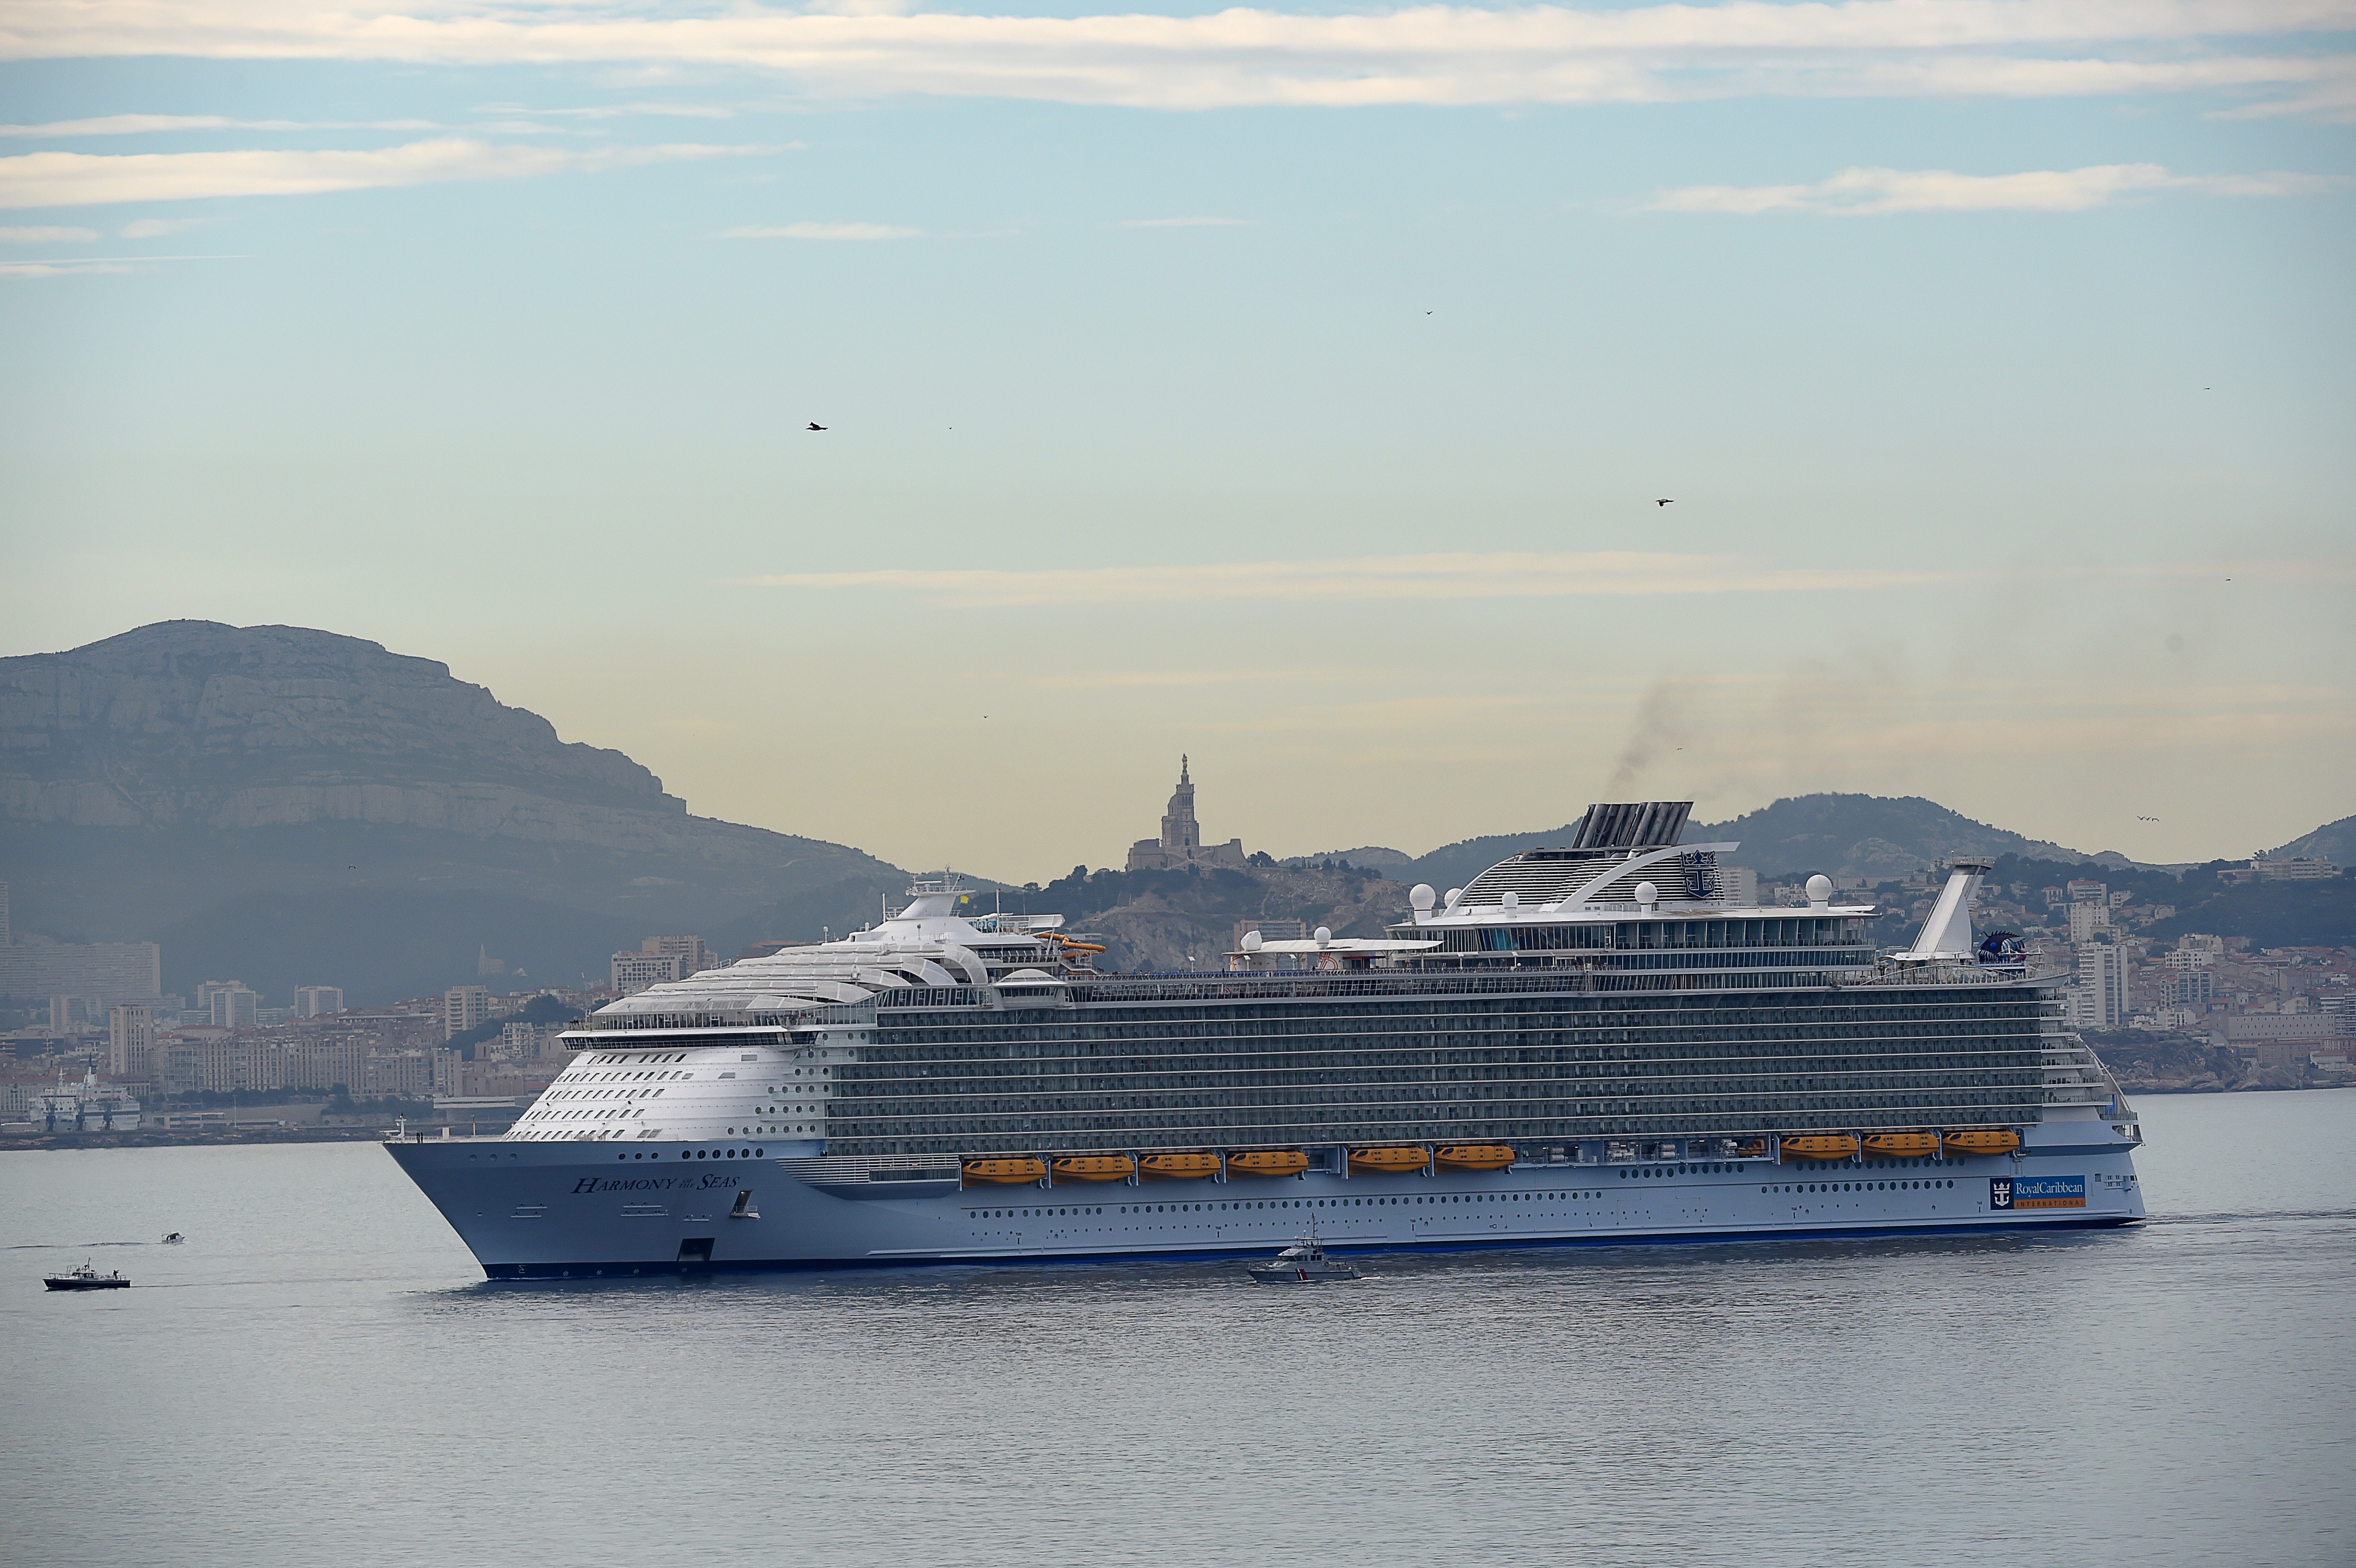 The Harmony of the Seas, the world's biggest-ever cruise ship, enters the port of Marseille, southern France, for a cruise stopover on June 21, 2016.  The 120,000-tonne, 66 metres (217 feet) wide, the widest cruise ship ever built, and 362-metre long ship, is cruising the Mediterranean from its new home port of Barcelona, through Marseille, Italy and the Balearic islands. / AFP PHOTO / BORIS HORVAT